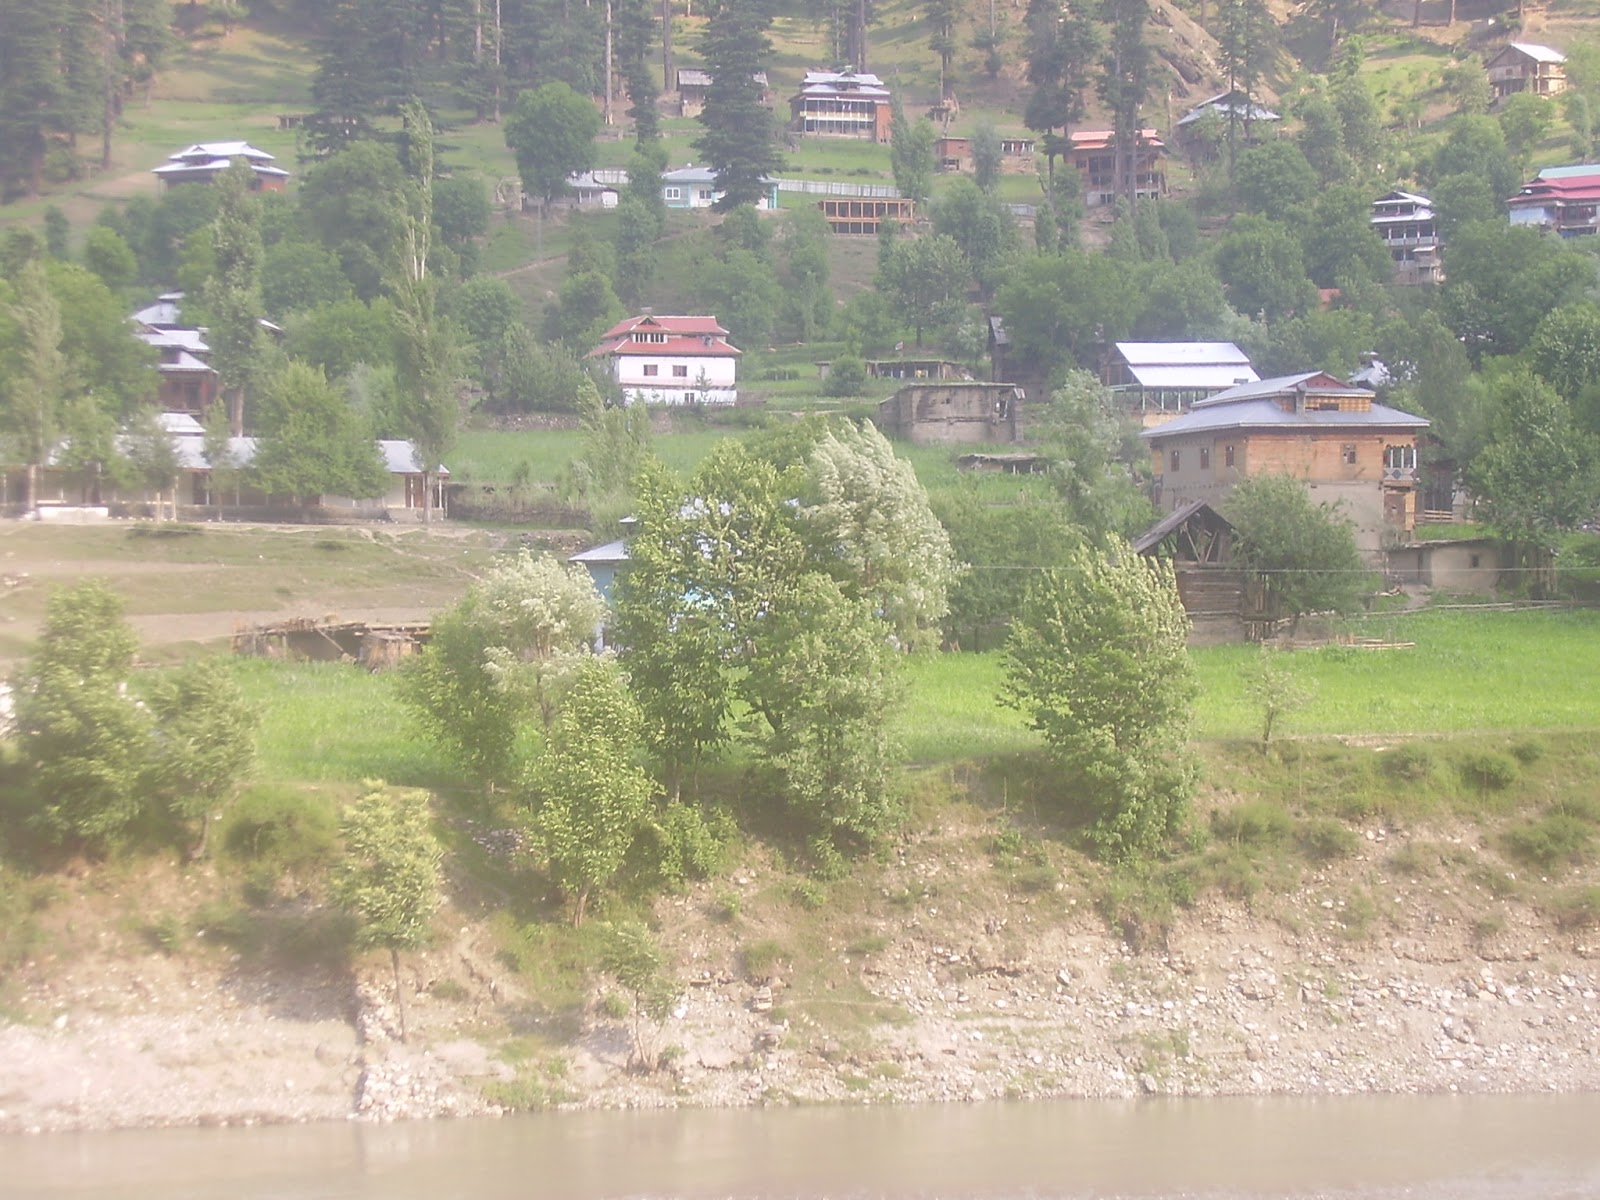 there is a beutiful rest house for visitors constructed tourism department of ajk government